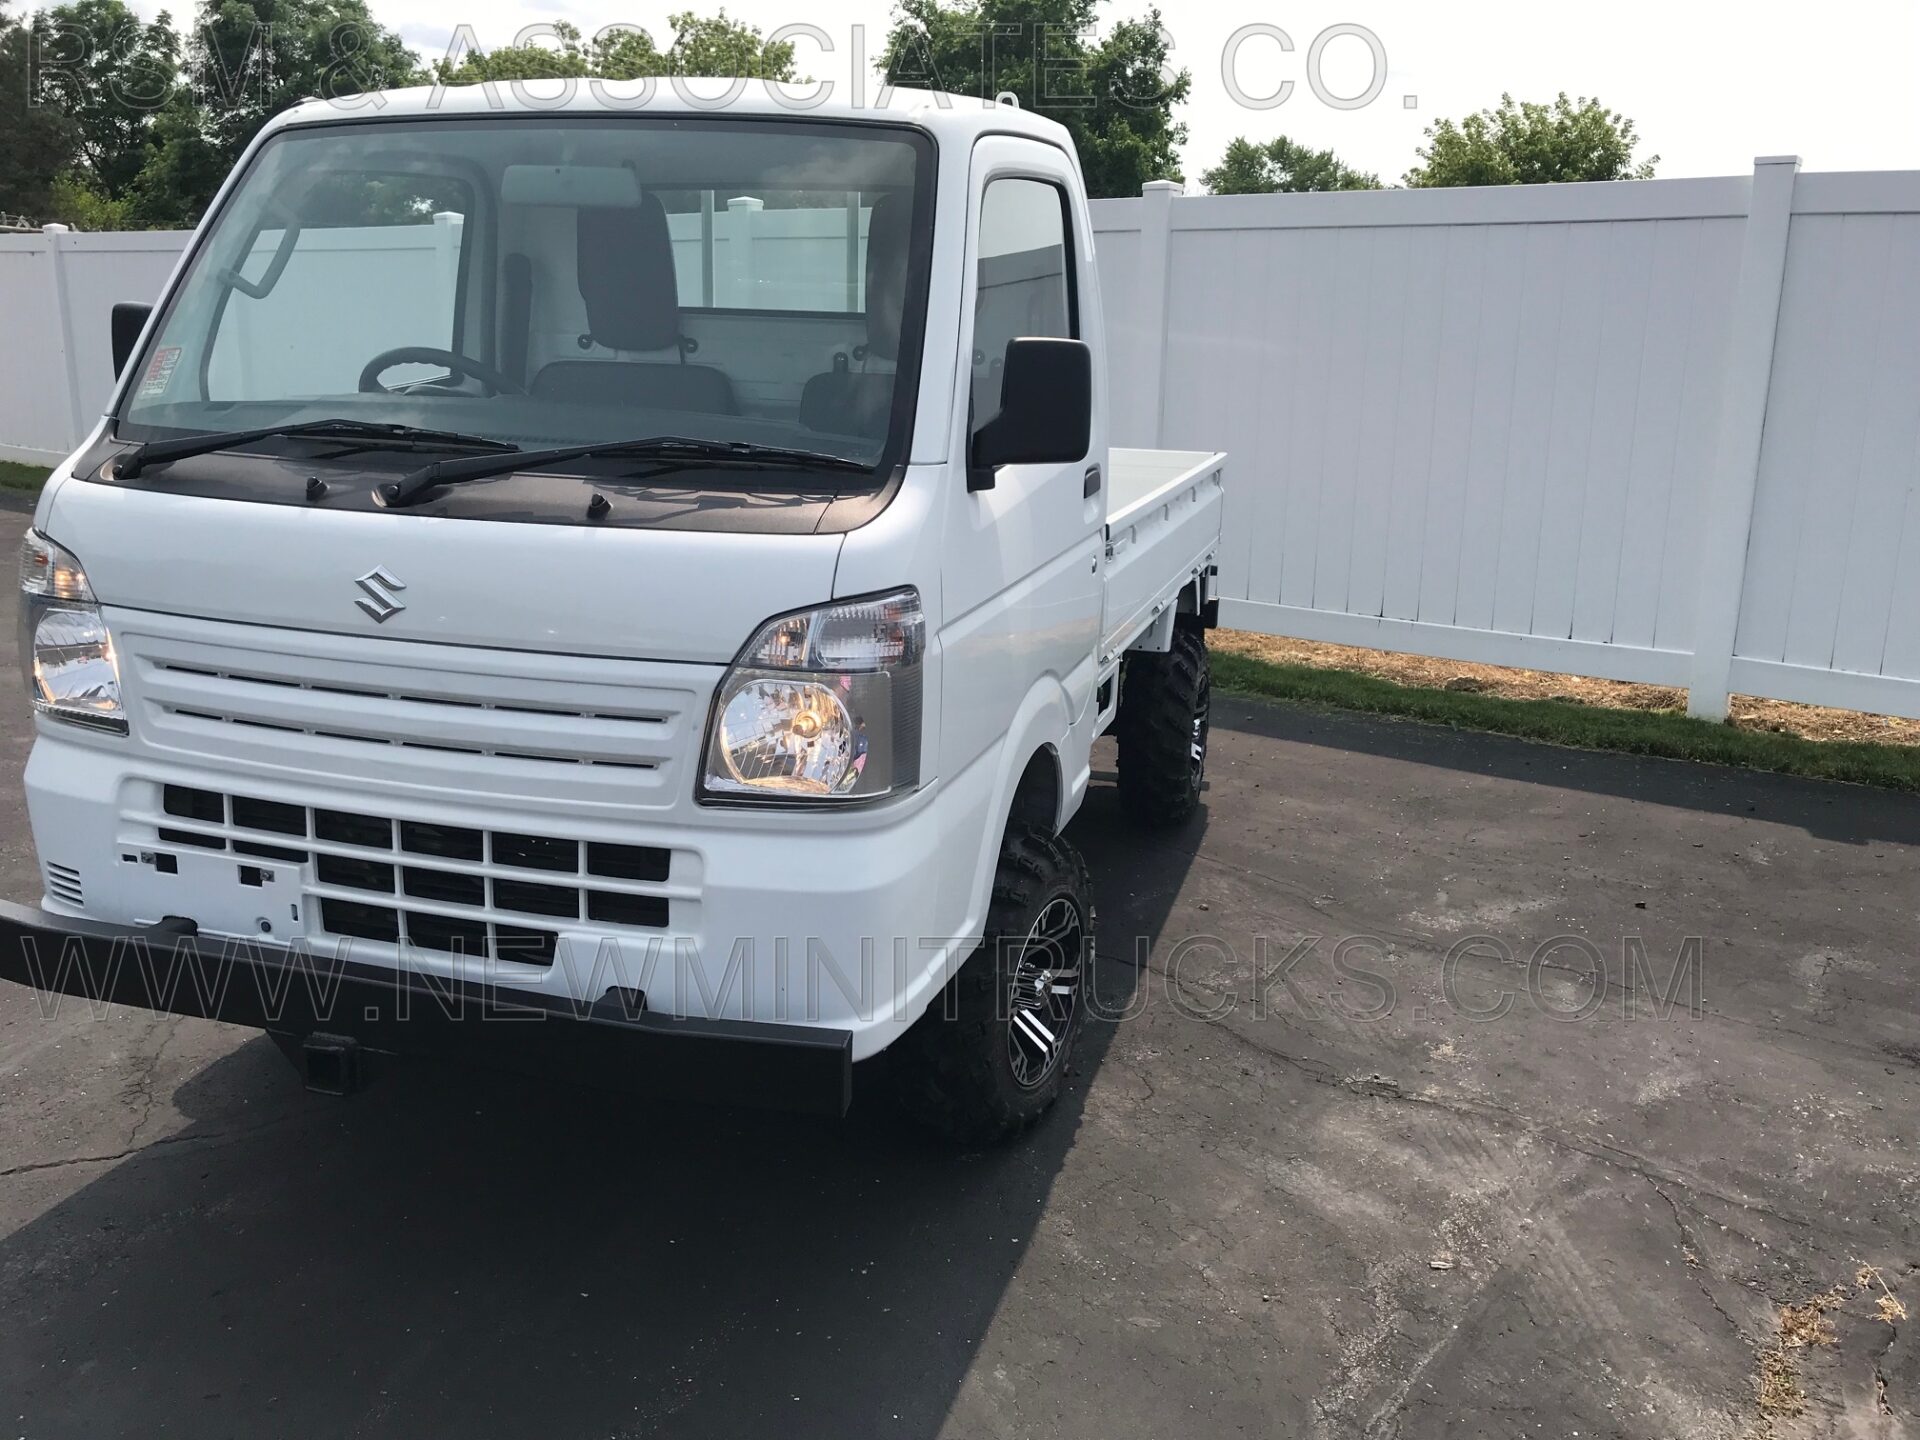 a small white truck